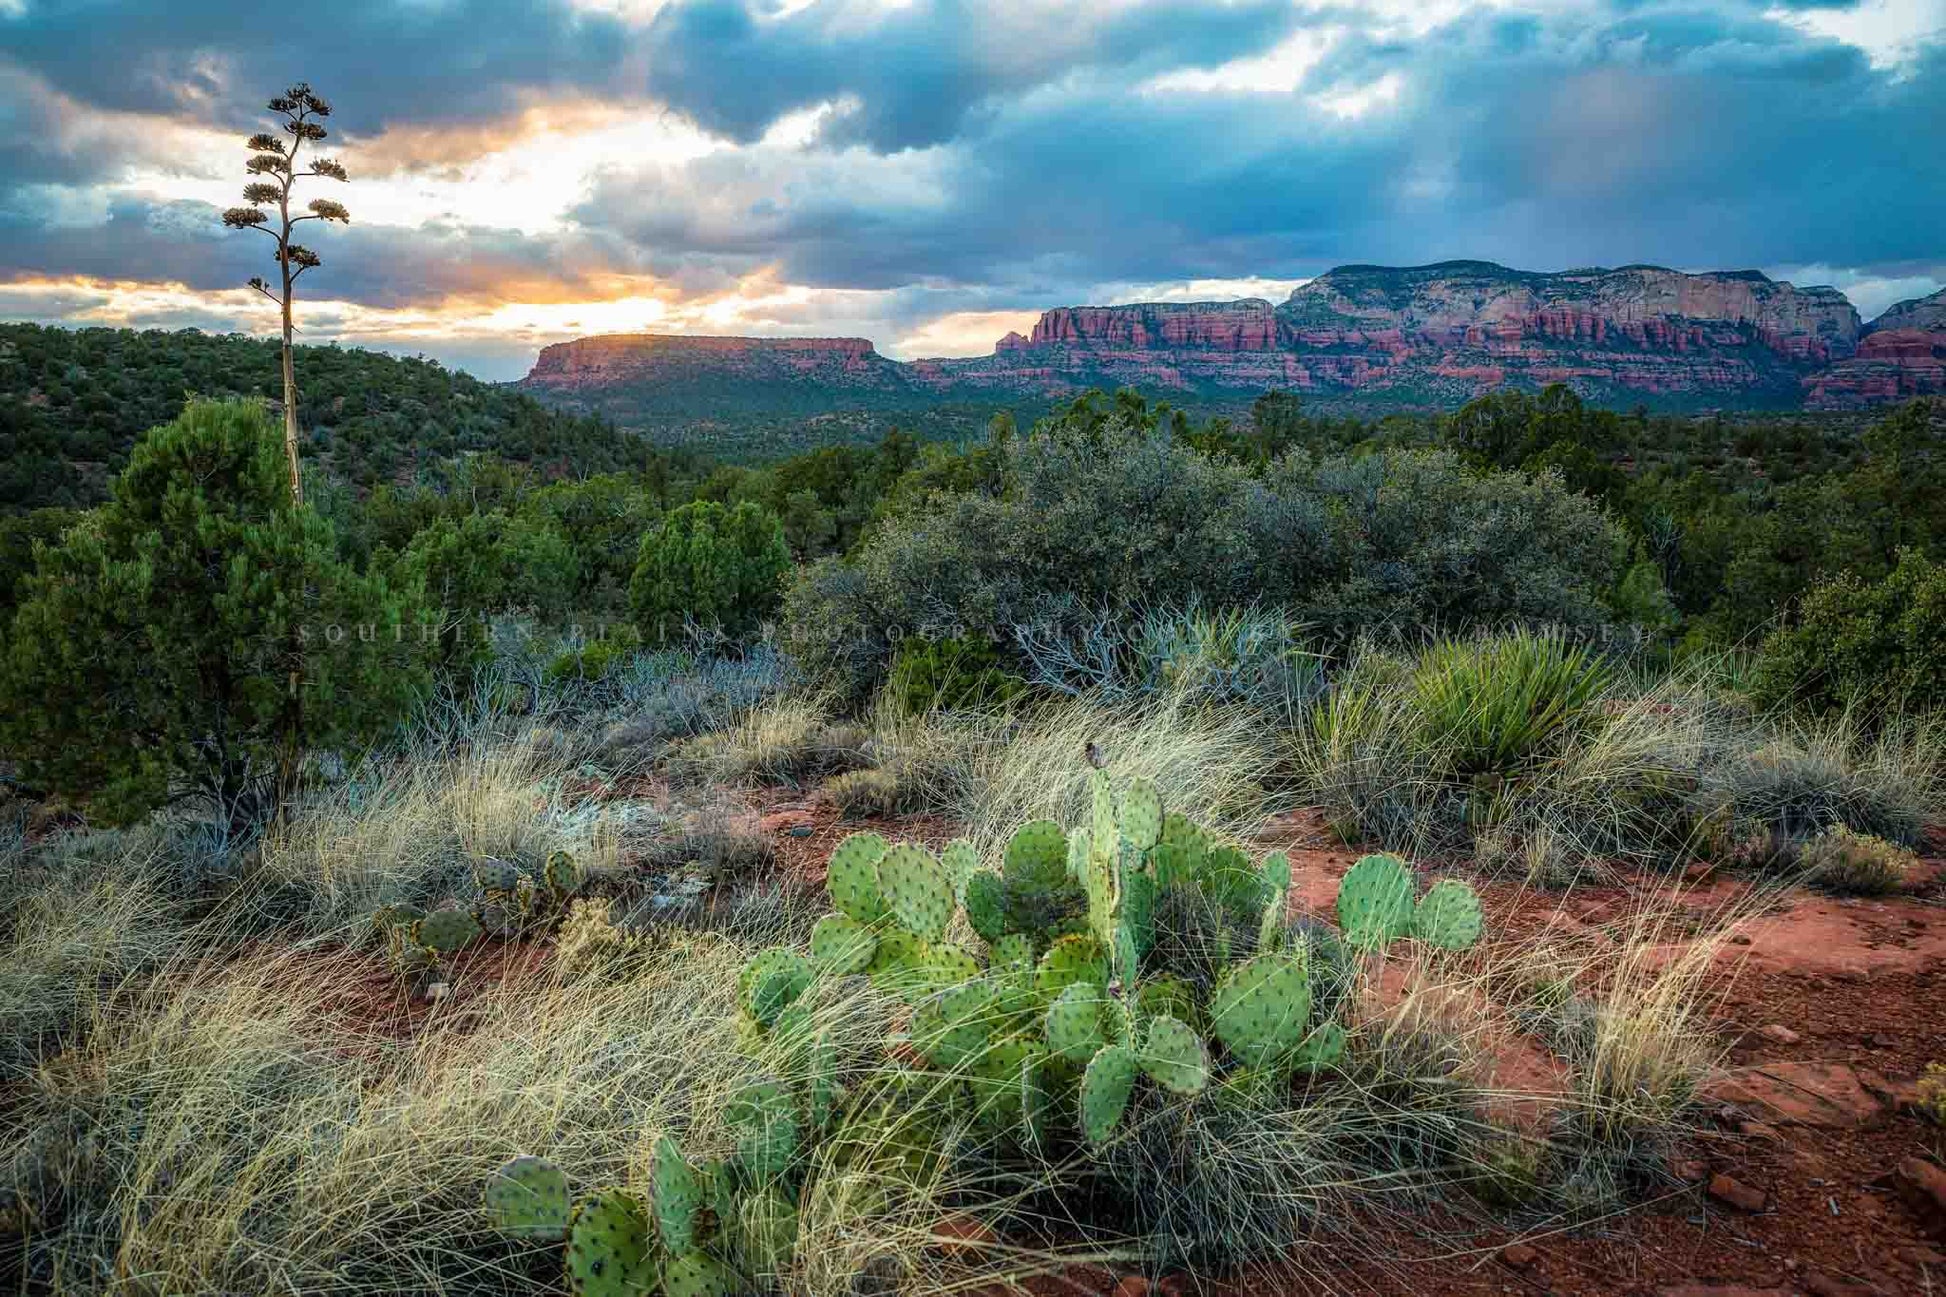 Desert southwest landscape photography print of cactus and plant life as a golden sunset takes place over the red rocks of Sedona, Arizona by Sean Ramsey of Southern Plains Photography.